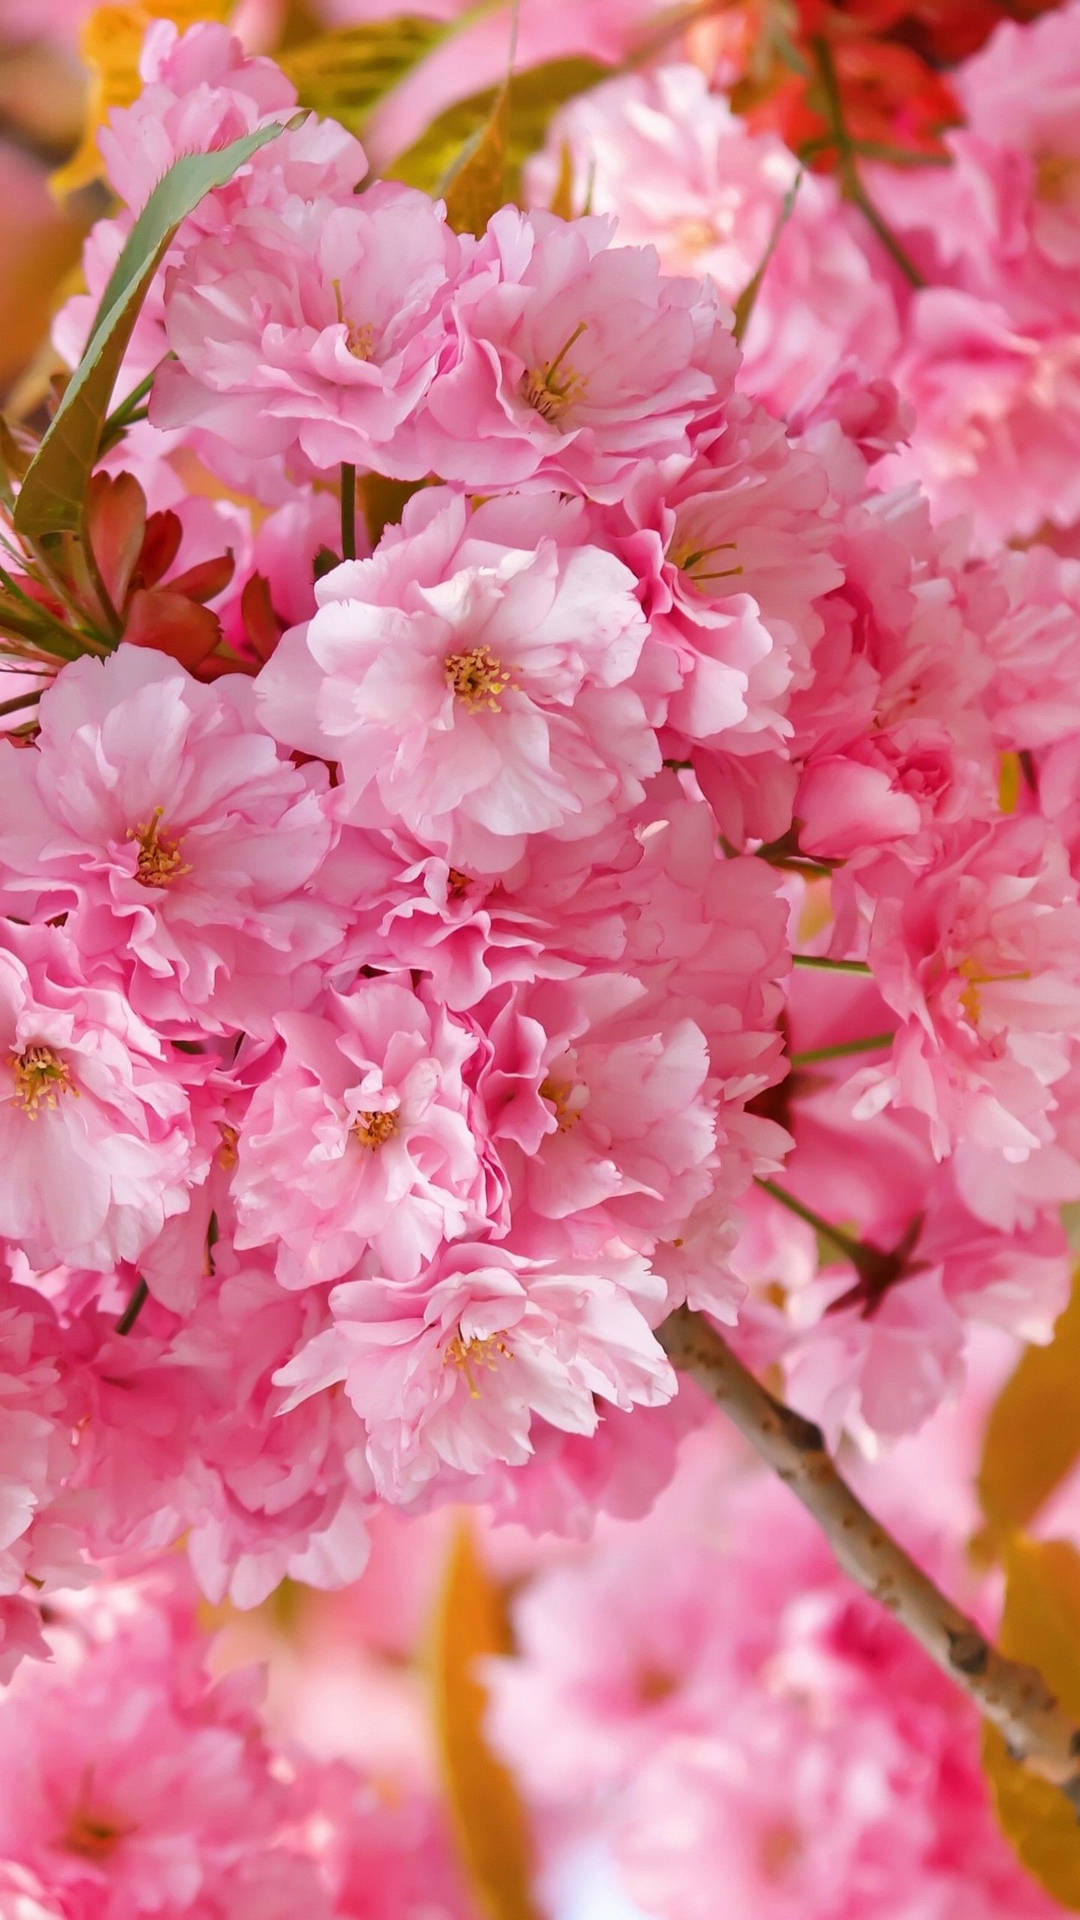 Clump Of Cute Pink Flower Blooms